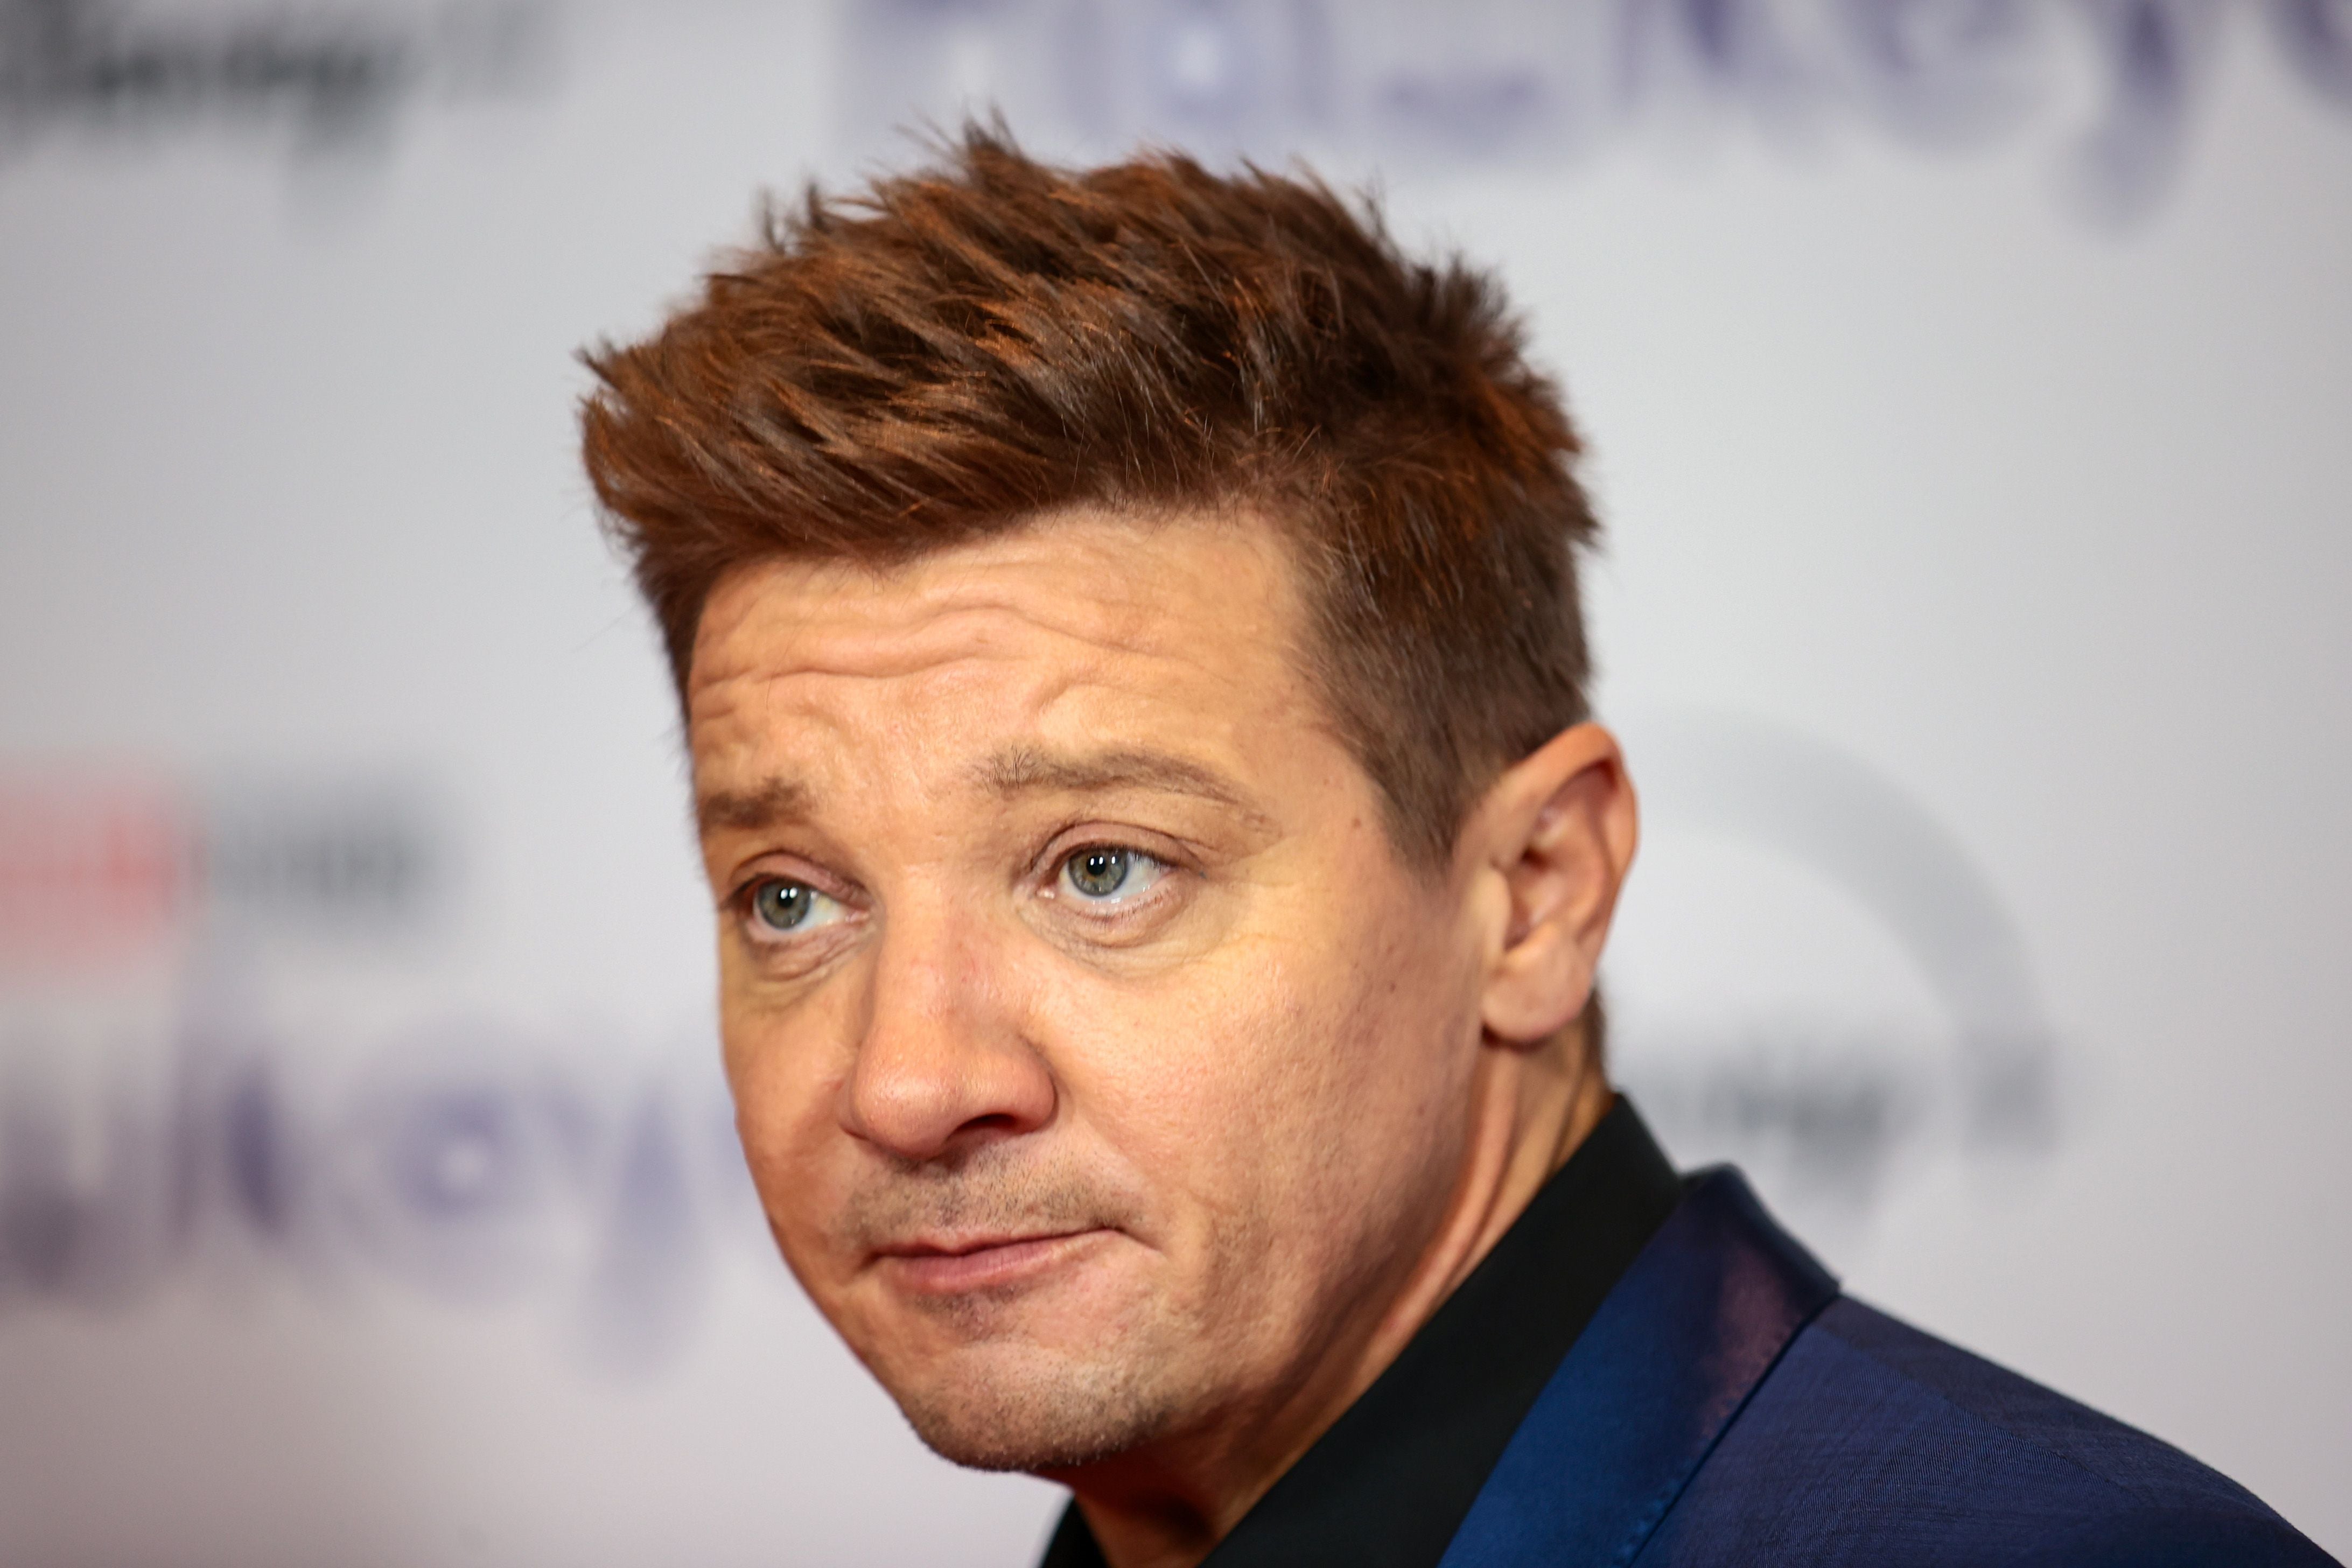 jeremy renner, hawkeye, the tonight show starring jimmy fallon, jeremy renner shares gory and brutal details of snowplow accident: ‘my eyeball was out’